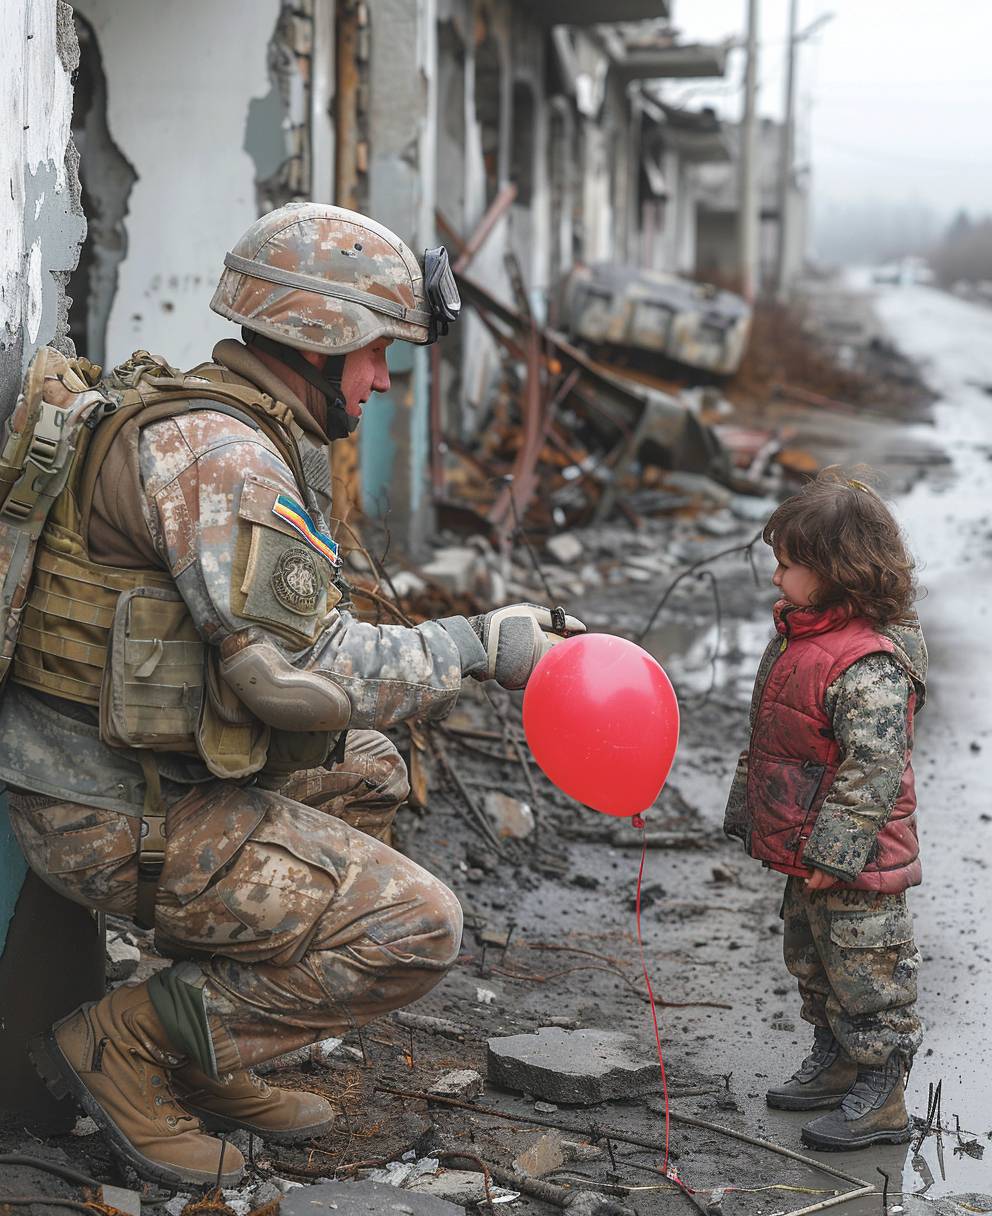 A British soldier on his knee gifting a red balloon to a small girl, in the background there is a destroyed city in Ukraine. A Ukrainian flag hangs in tatters of the side of a building. A warzone including an abandoned tank